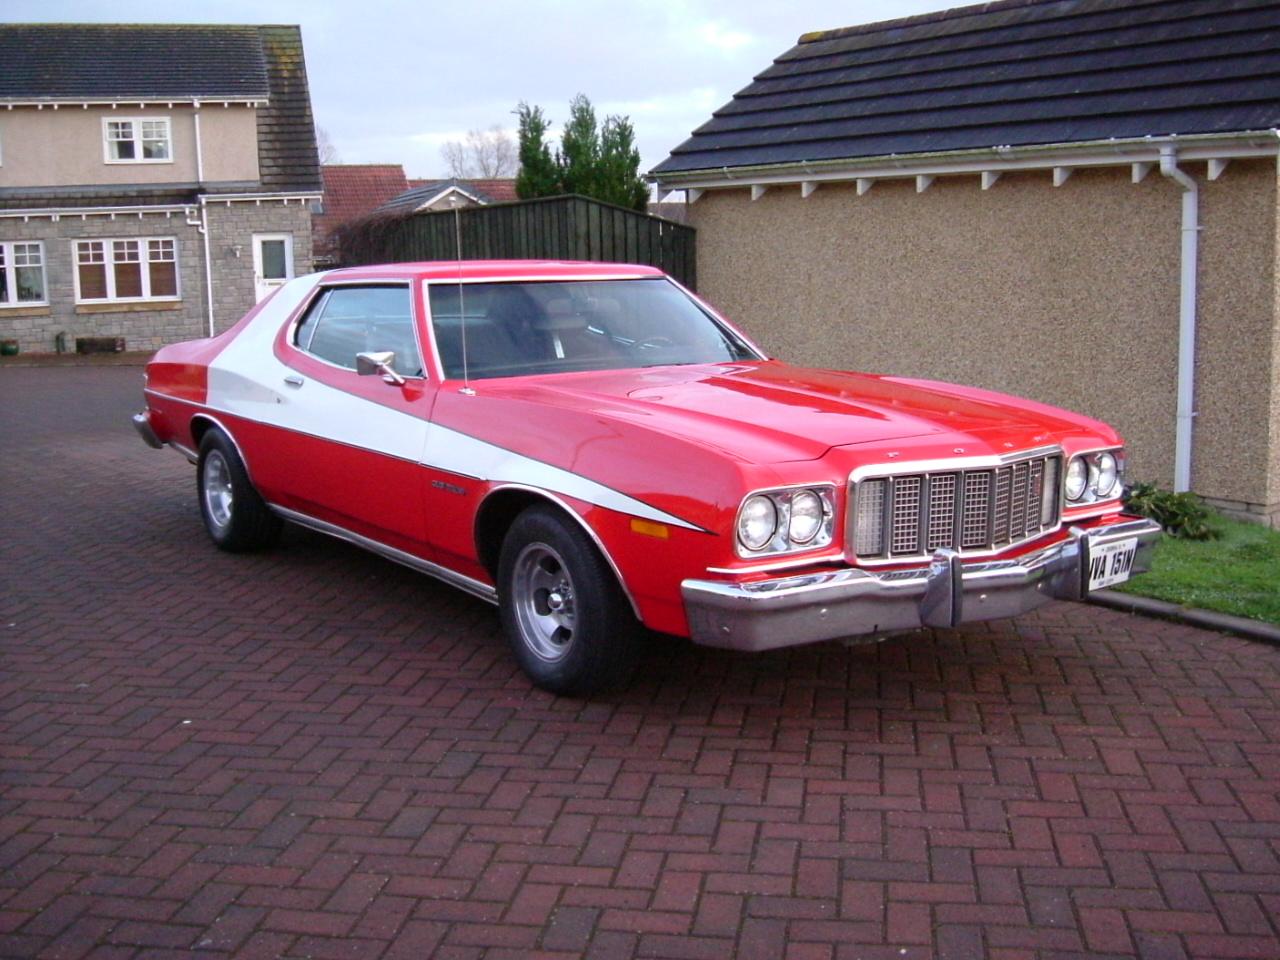 Ford Gran Torino(Starsky and Hutch car,from tv show).